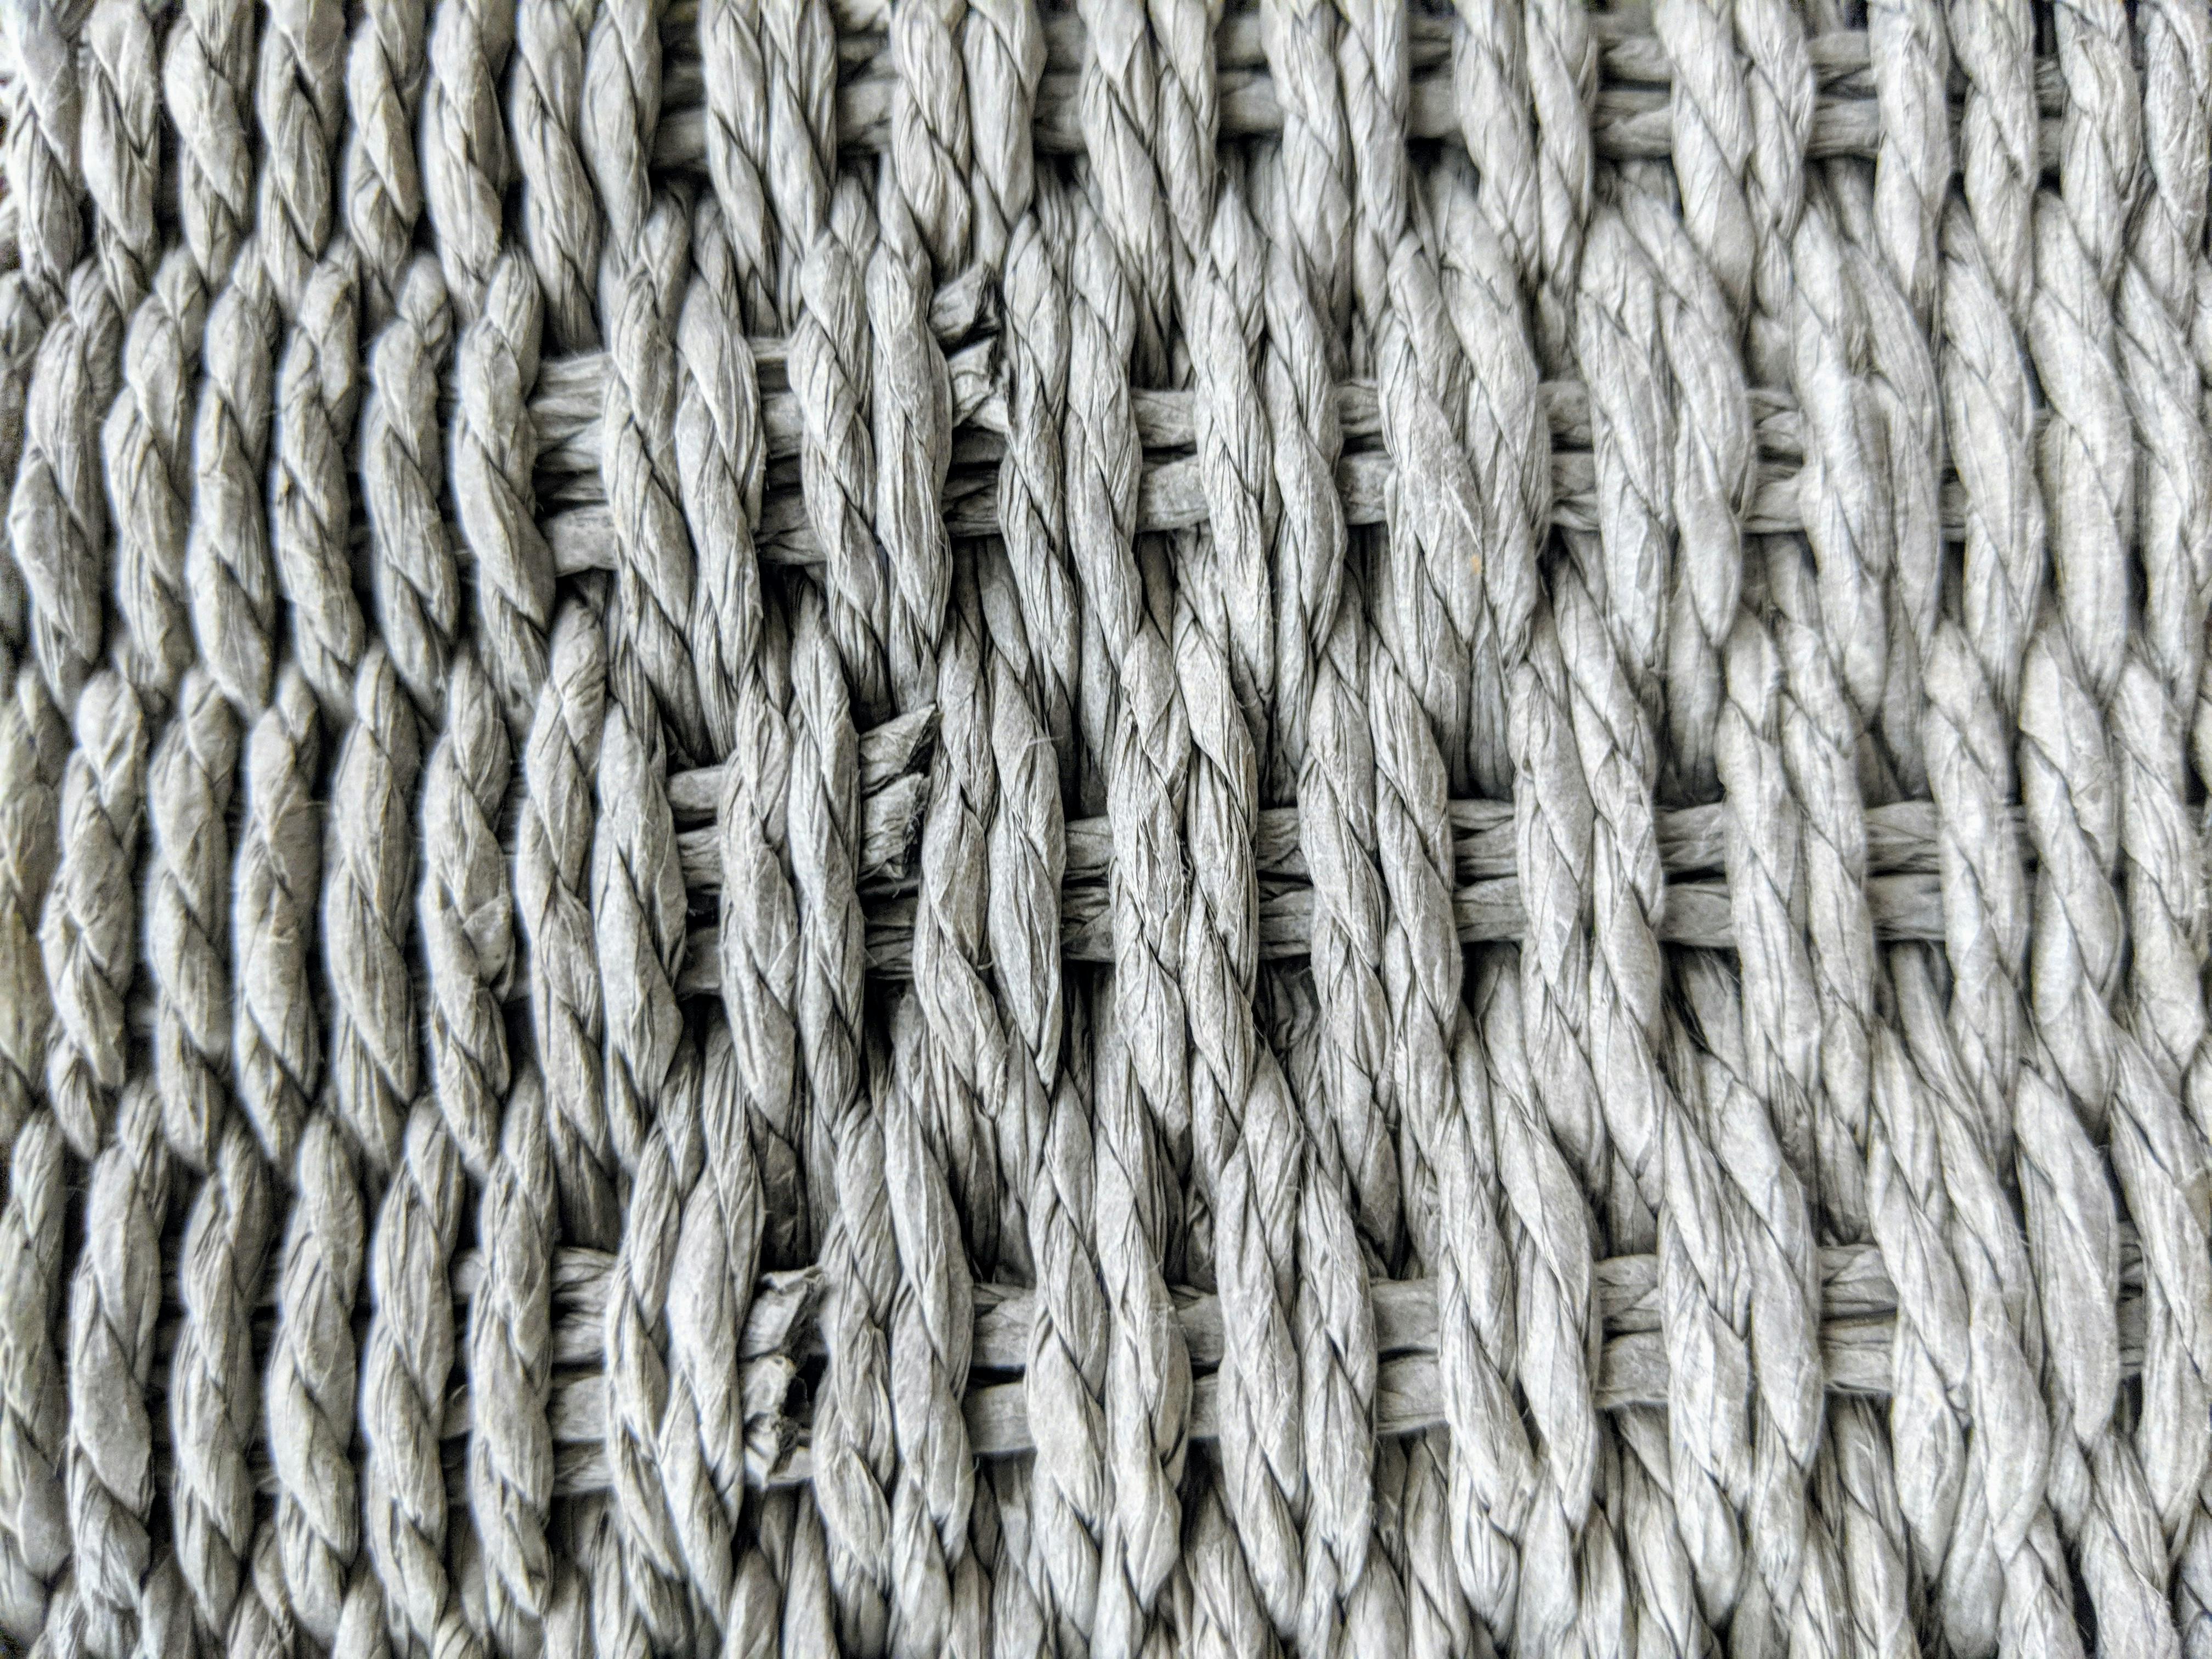 Free stock photo of woven texture